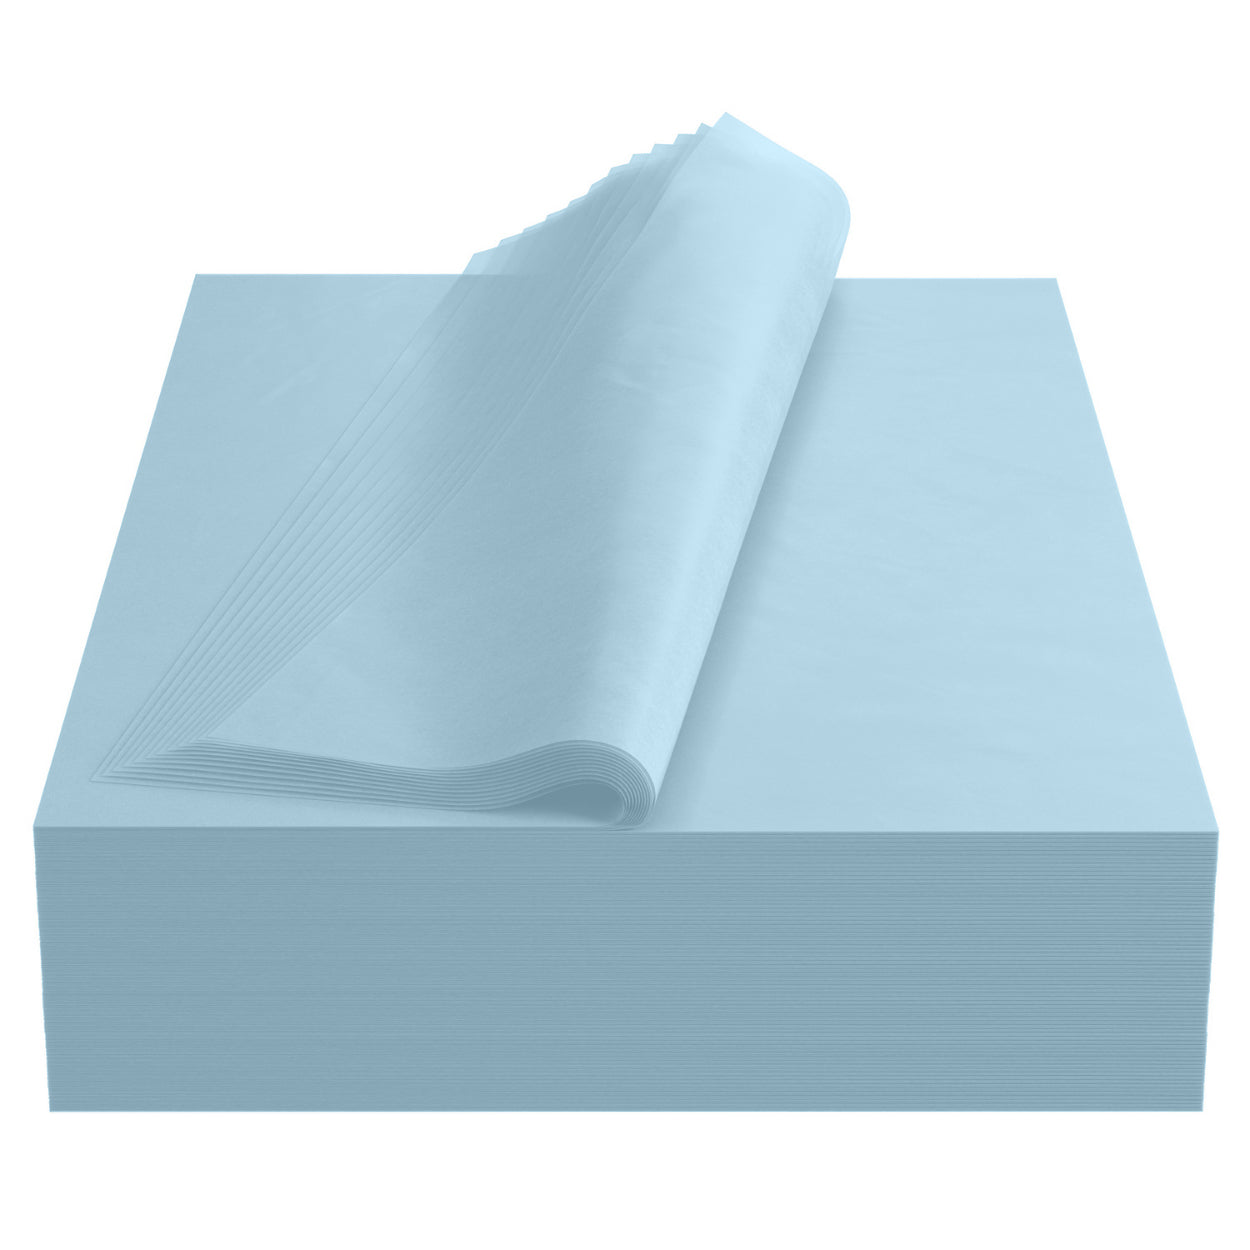 Case of Tissue Paper - 2400 Sheets